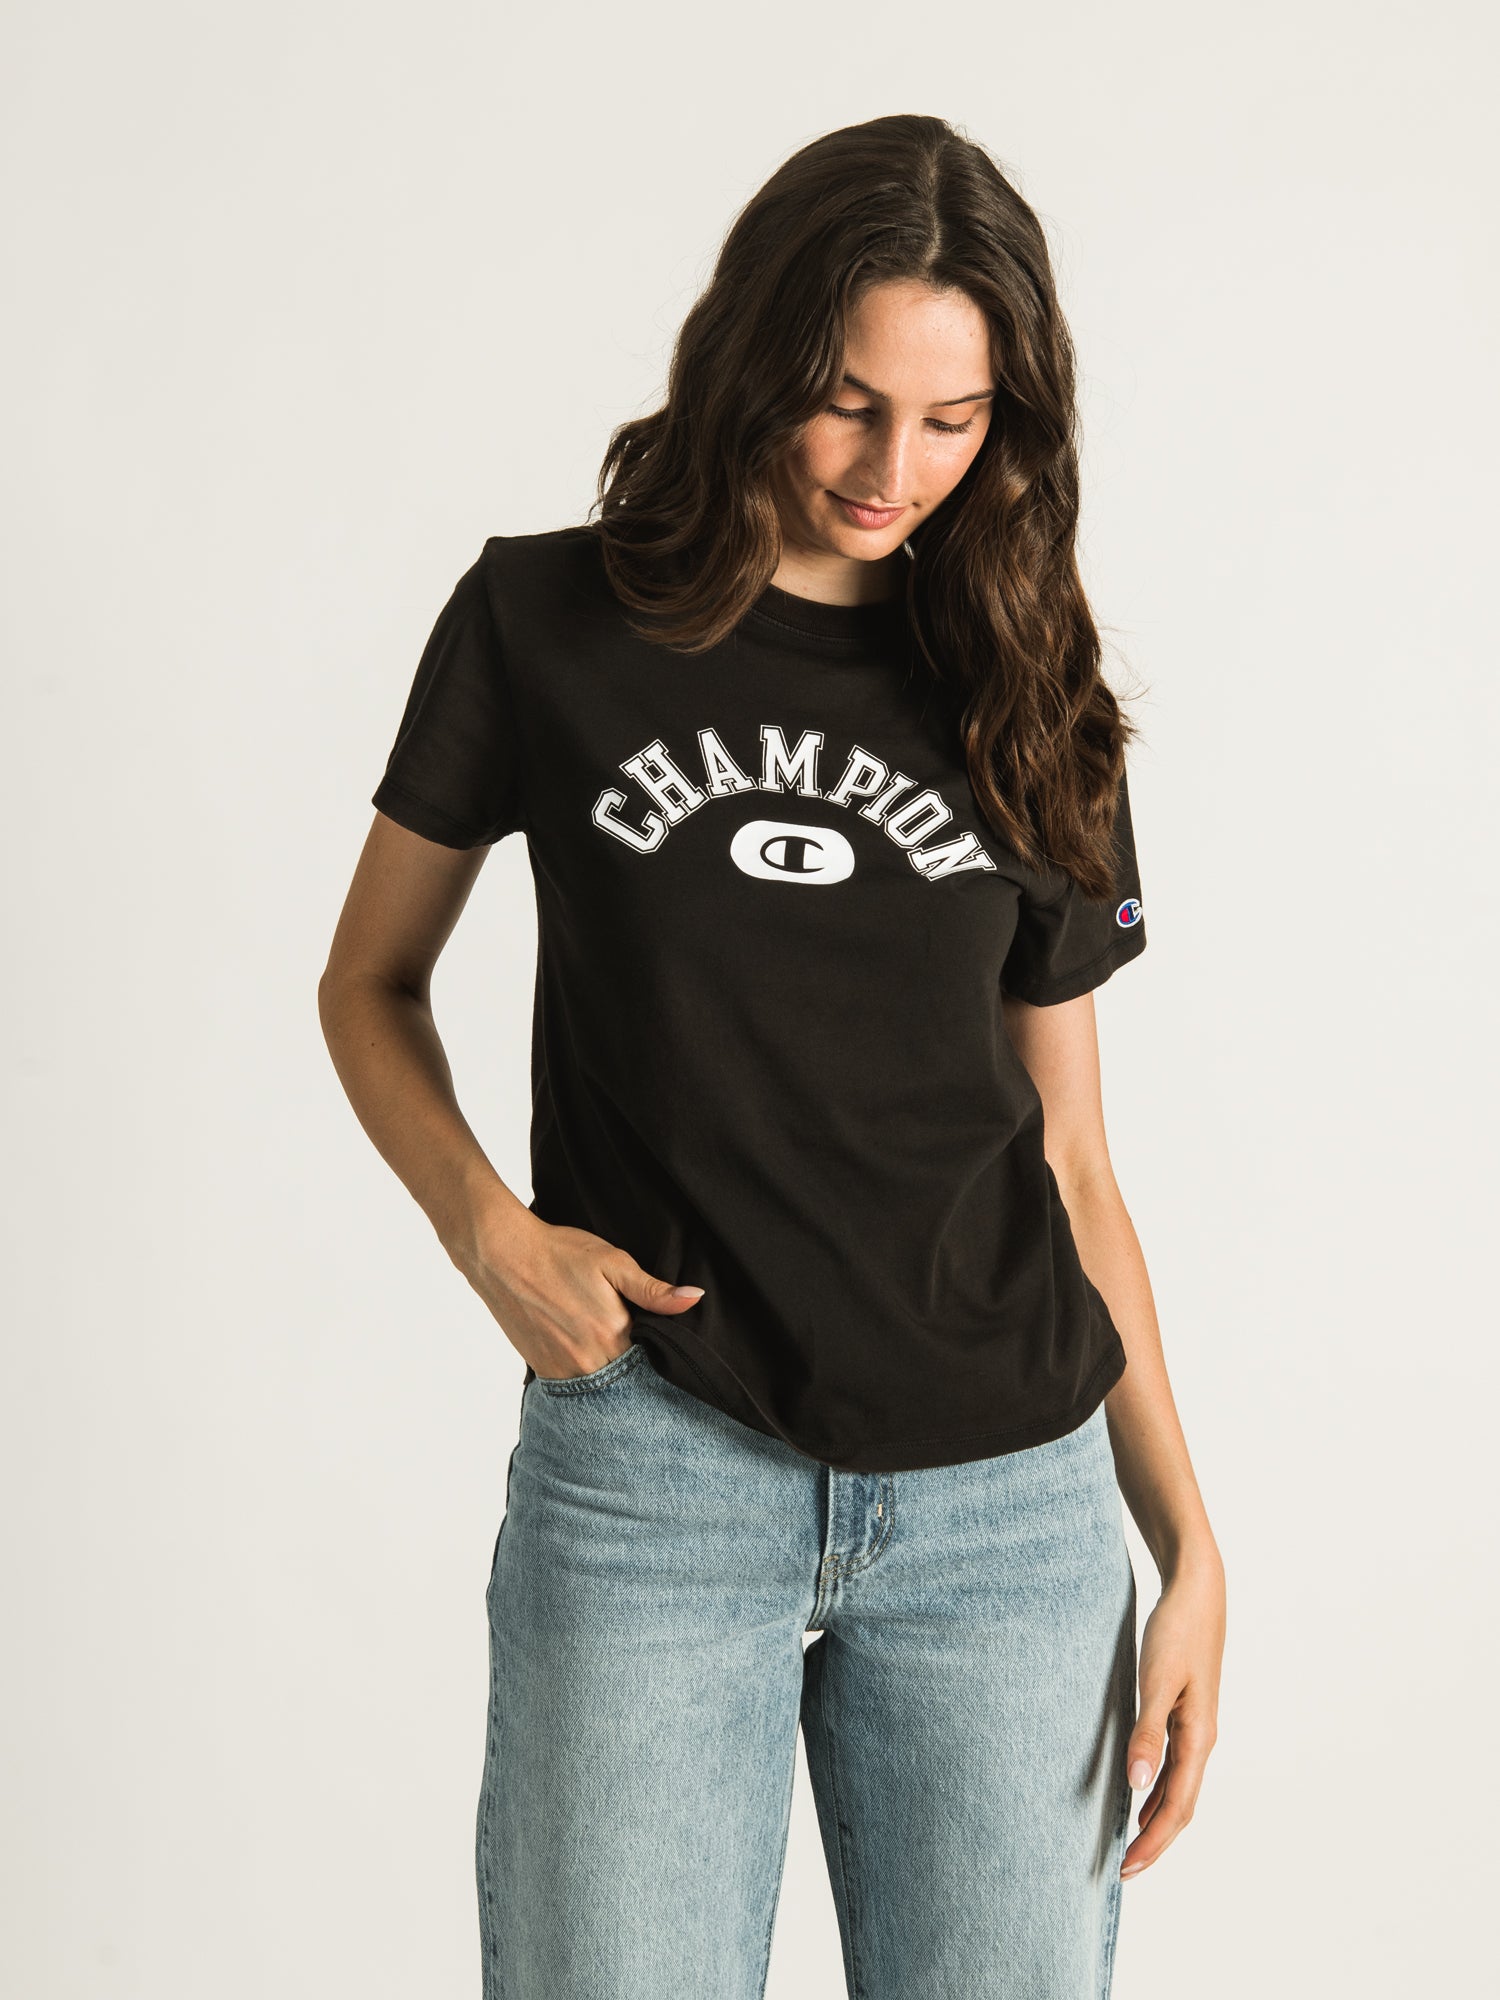 Champion Womens - The Best Selection in Canada - Shop Now